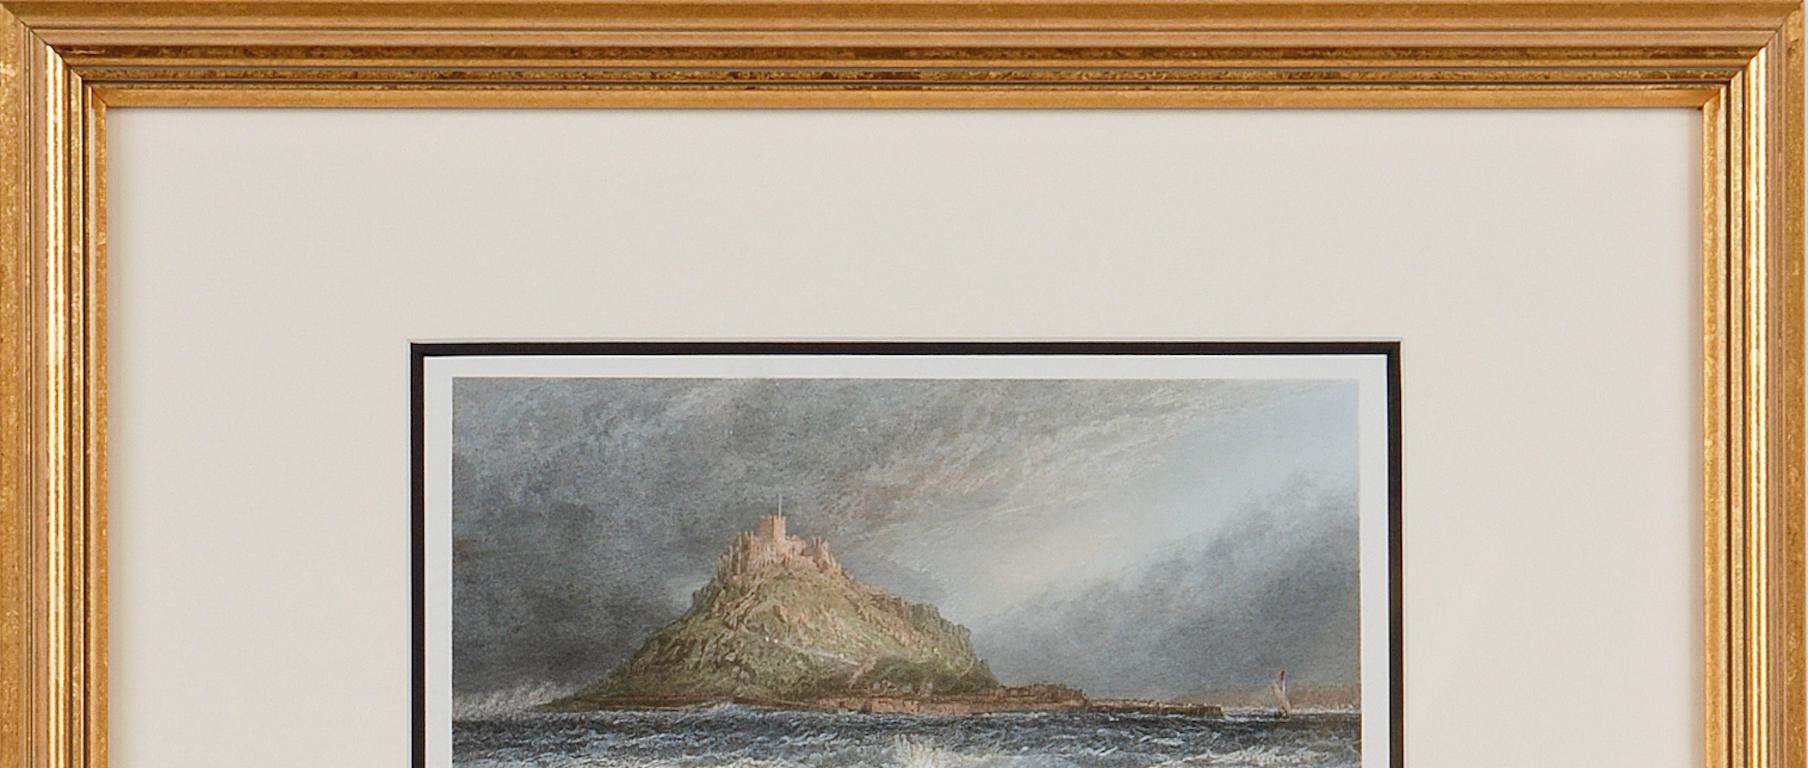 St. Michael's Mount, Cornwall: A Framed 19th C. Engraving After Myles Foster - Beige Landscape Print by Myles Birket Foster